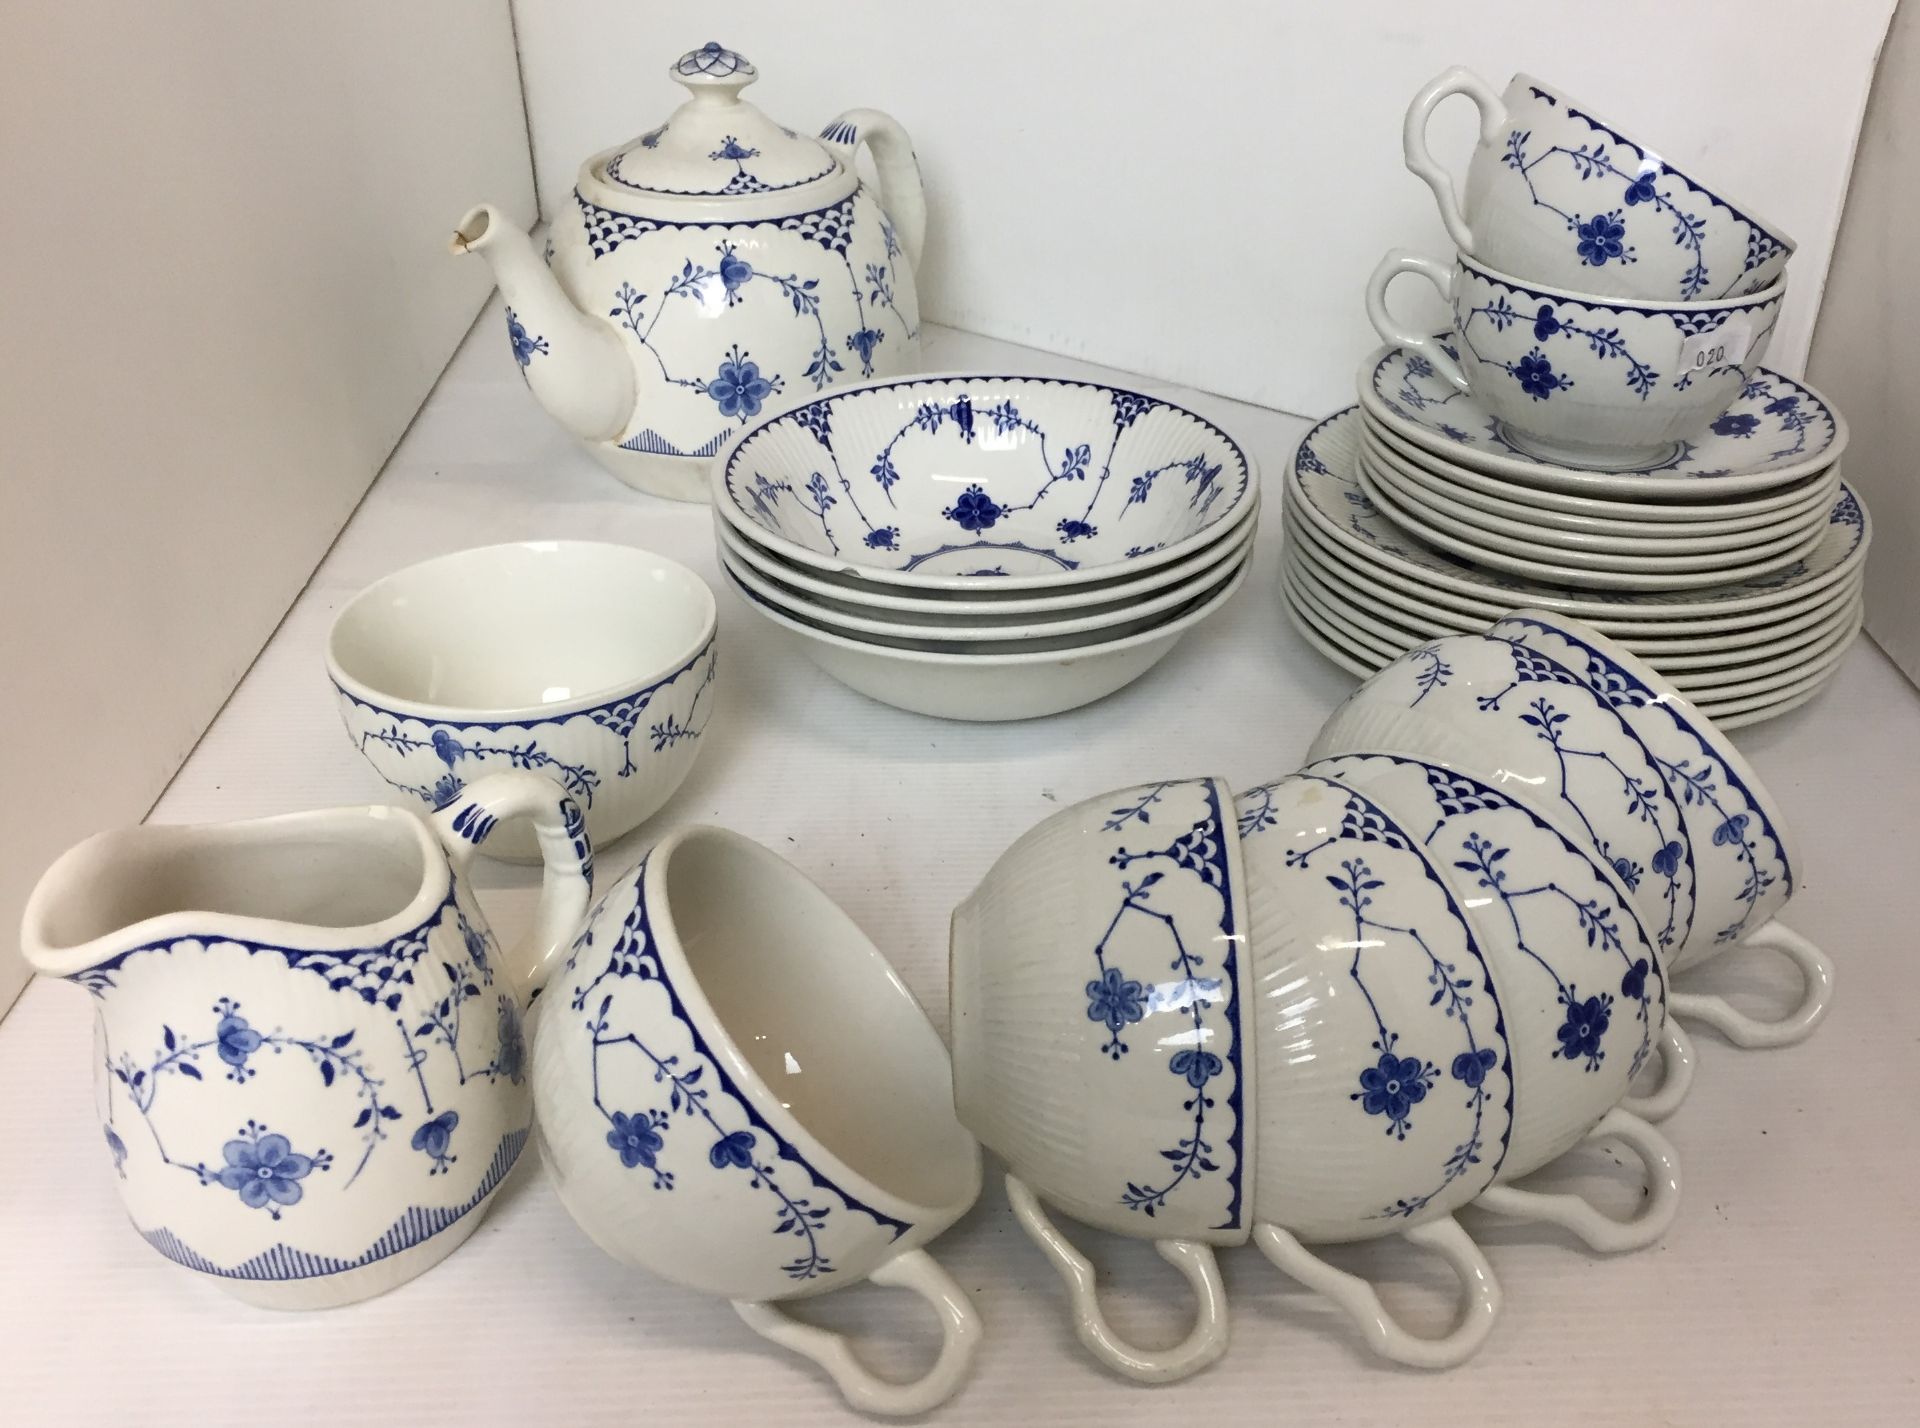 Twenty nine pieces of Masons and Furnivals Denmark blue and white tea service including teapot